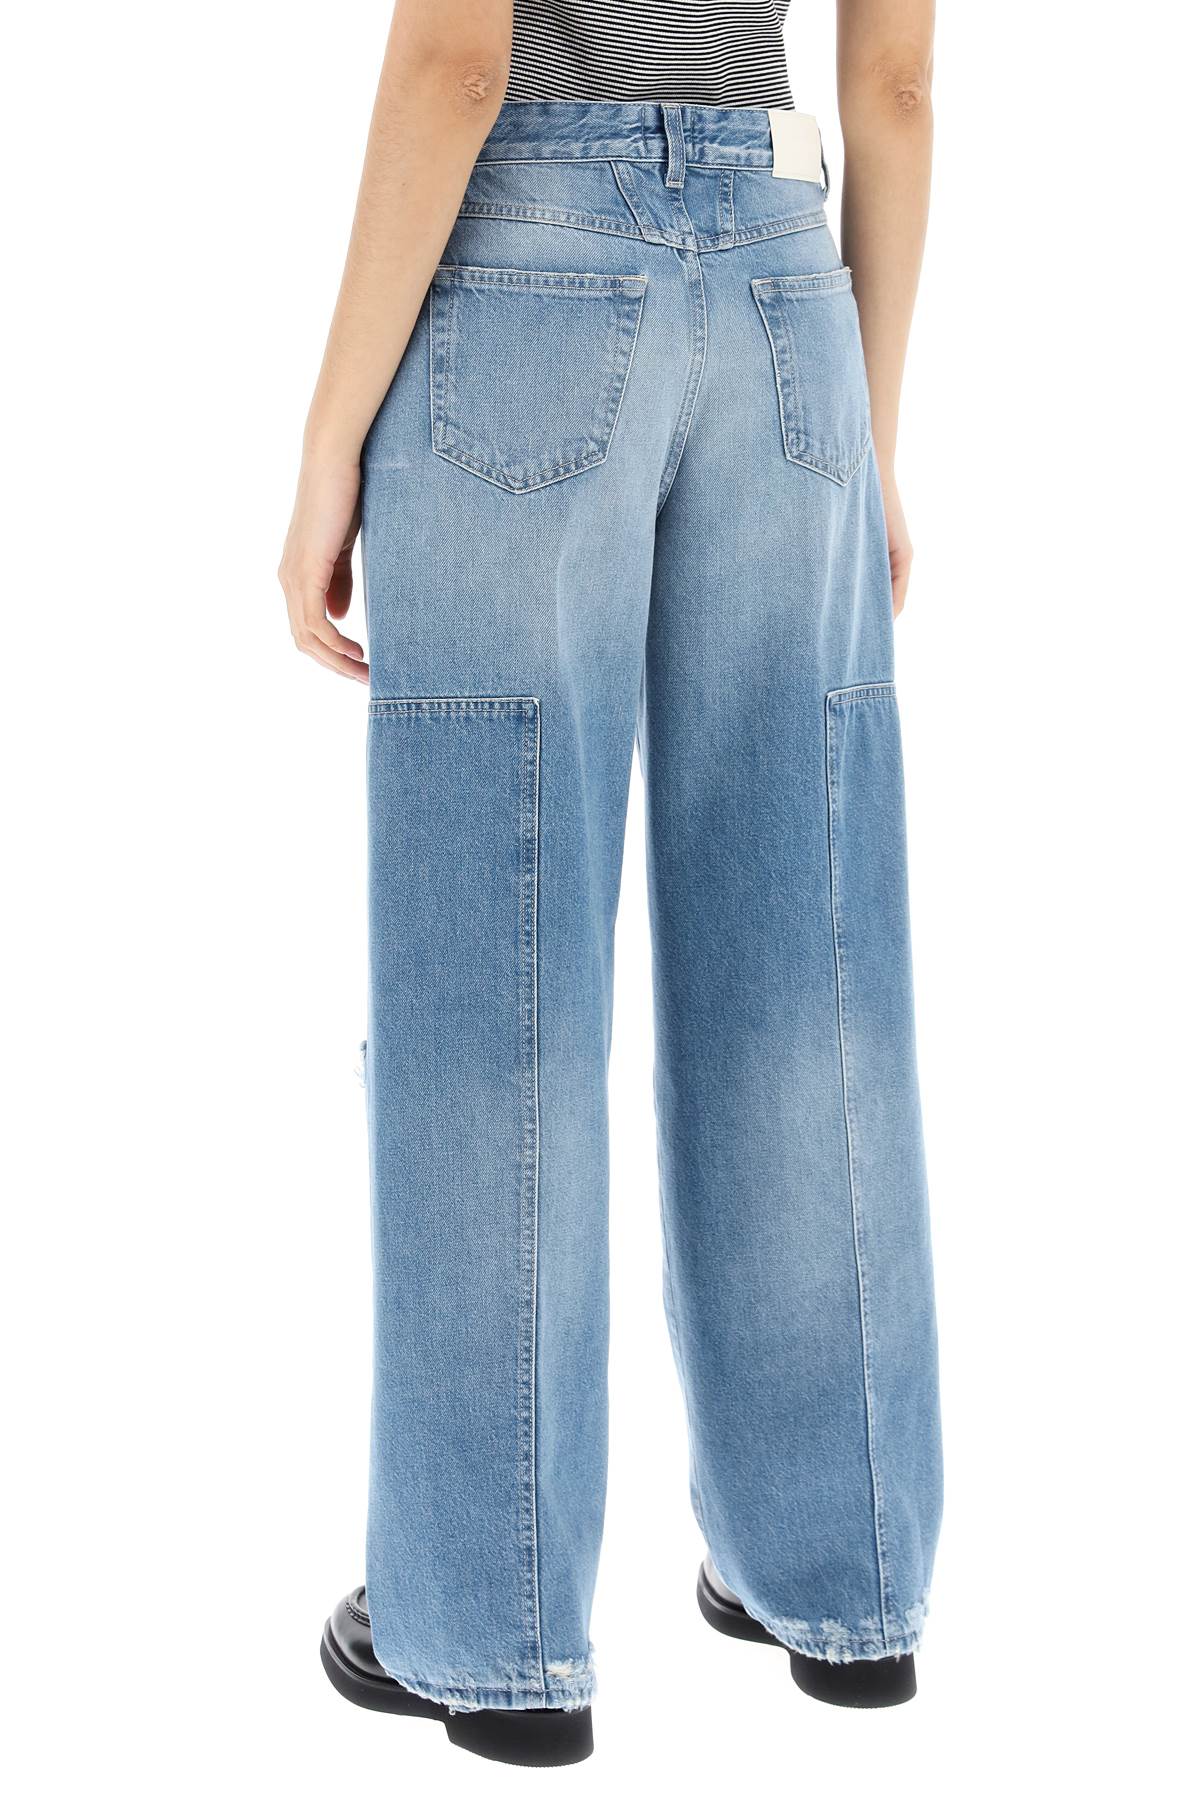 Closed nikka jeans with patches-2